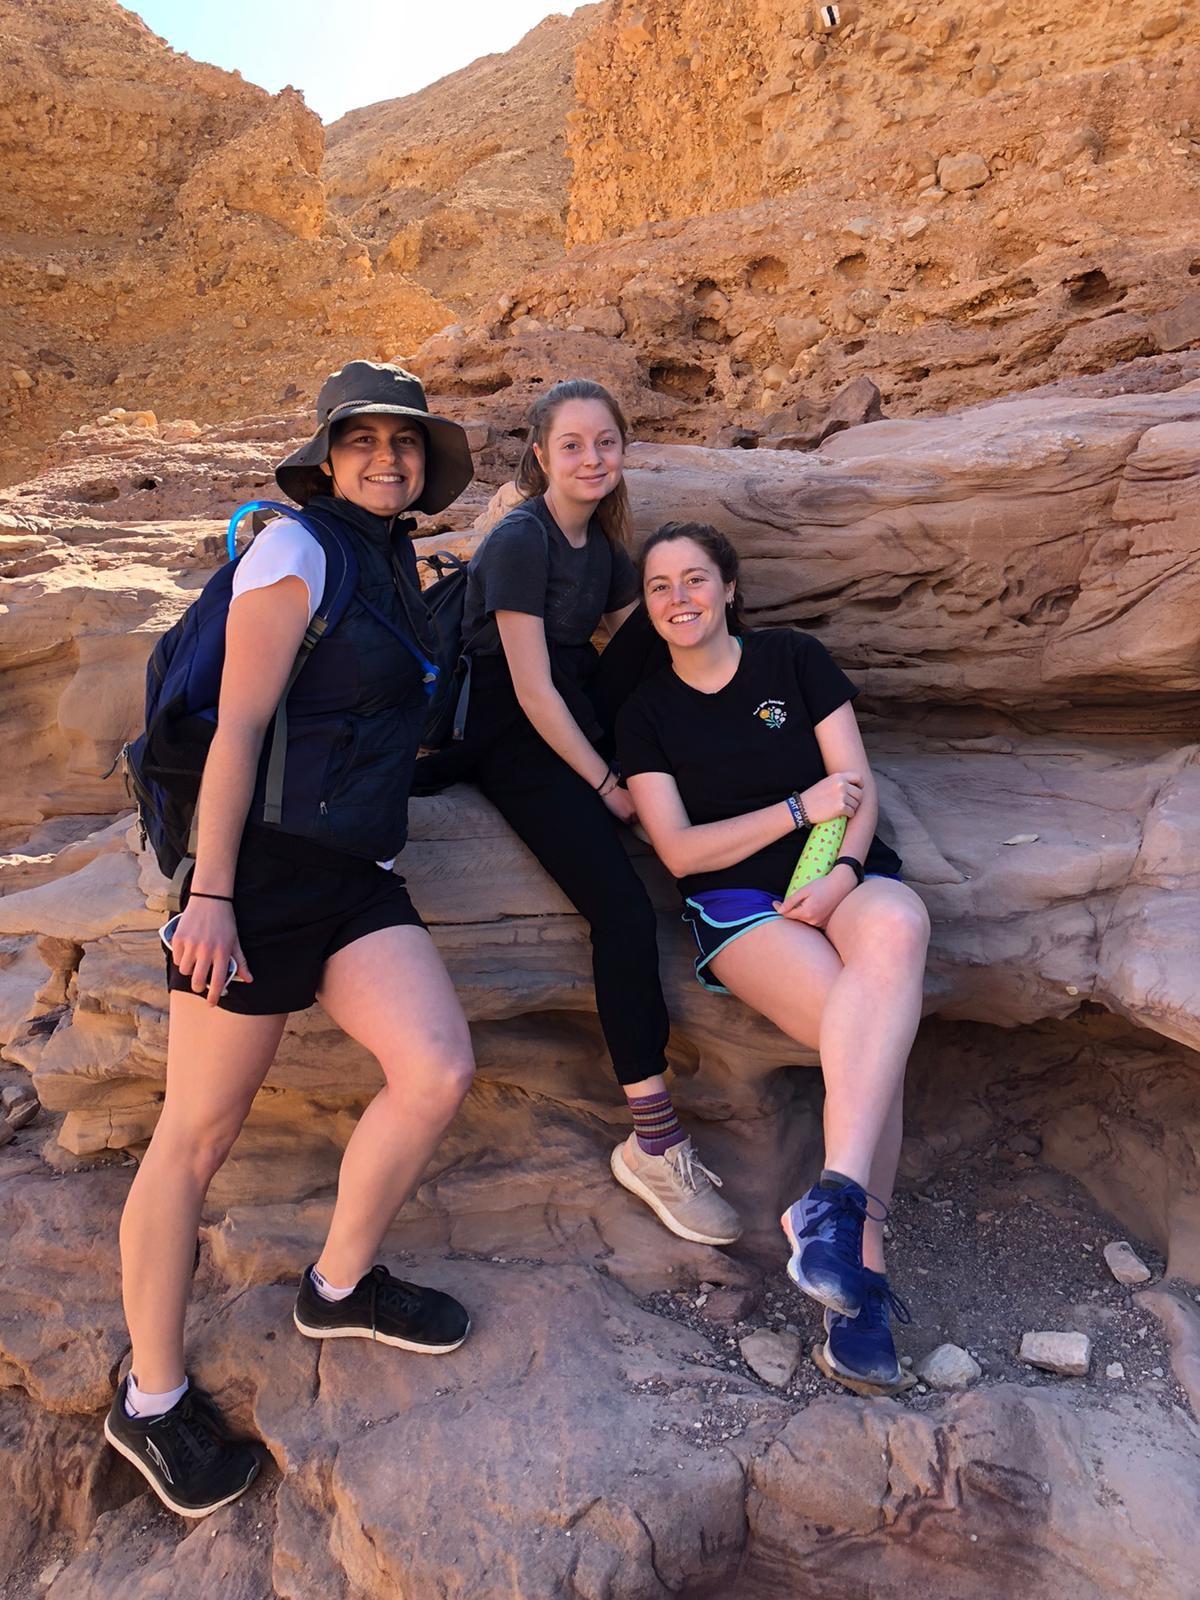 Trip of a Lifetime for Three Sisters


Doctors Elizabeth and Moss Linder’s daughters Elkanah, Cara, and Maris recently spent ten days together touring and enjoying an unforgettable Birthright Israel trip!